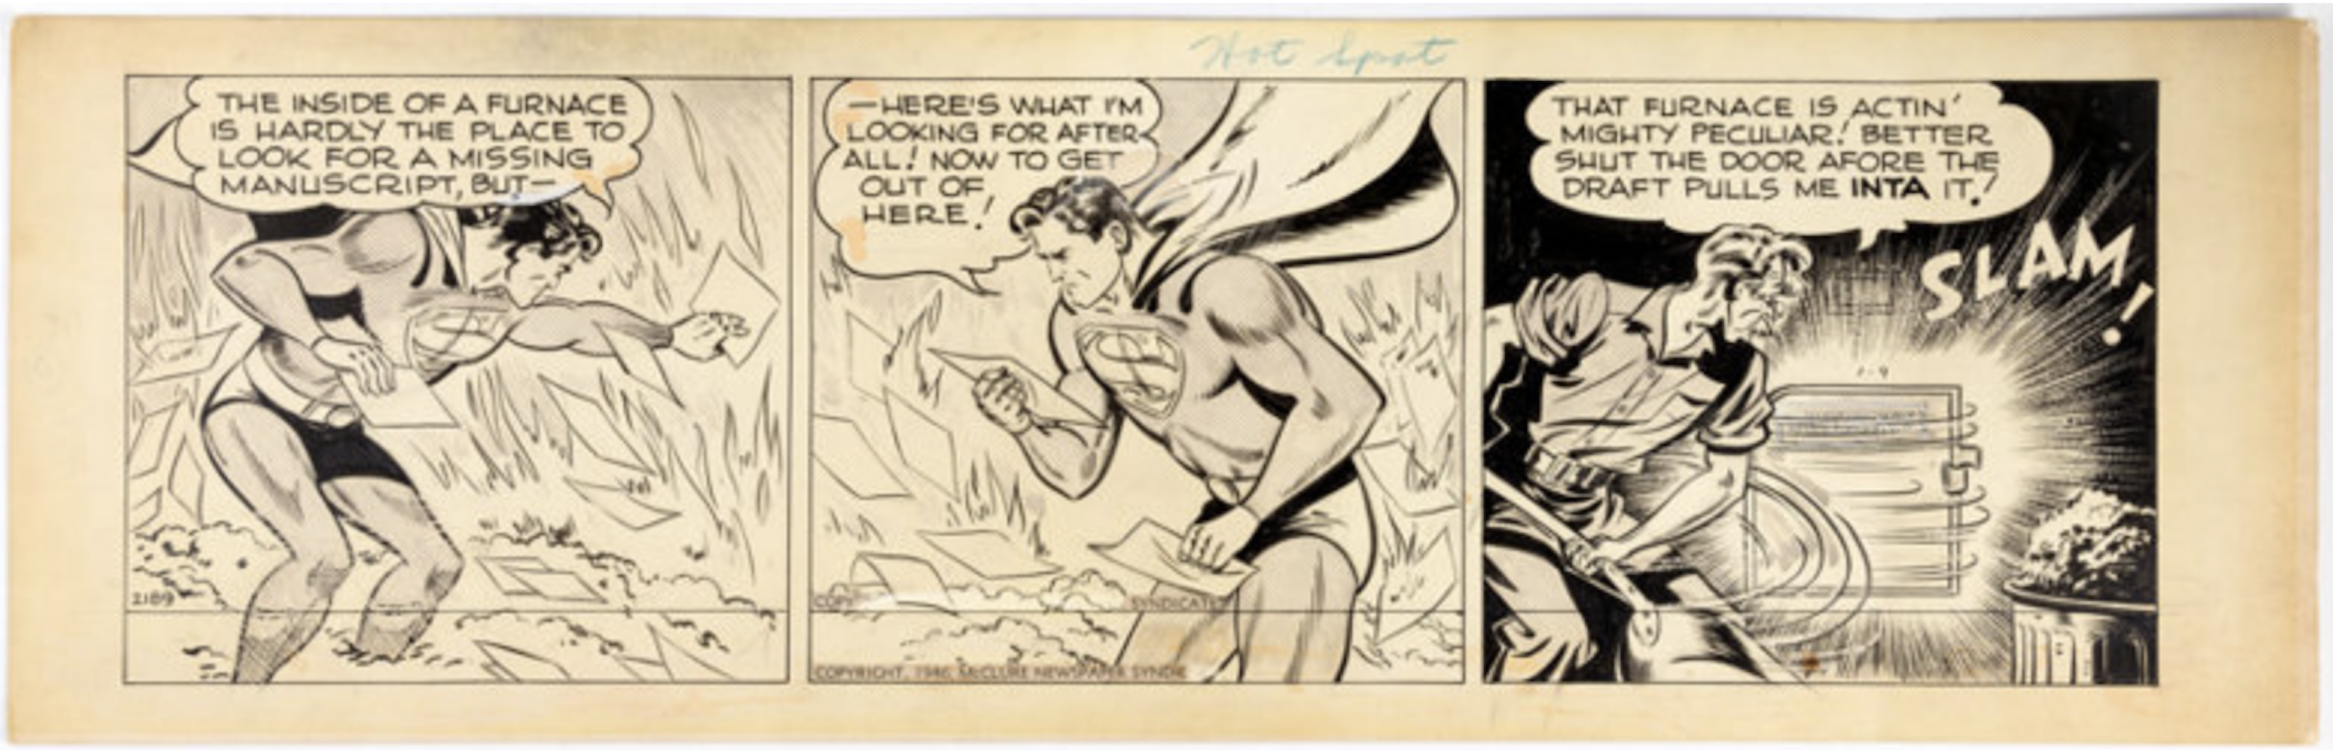 Superman Daily Comic Strip #2189 by Wayne Boring sold for $2,400. Click here to get your original art appraised.